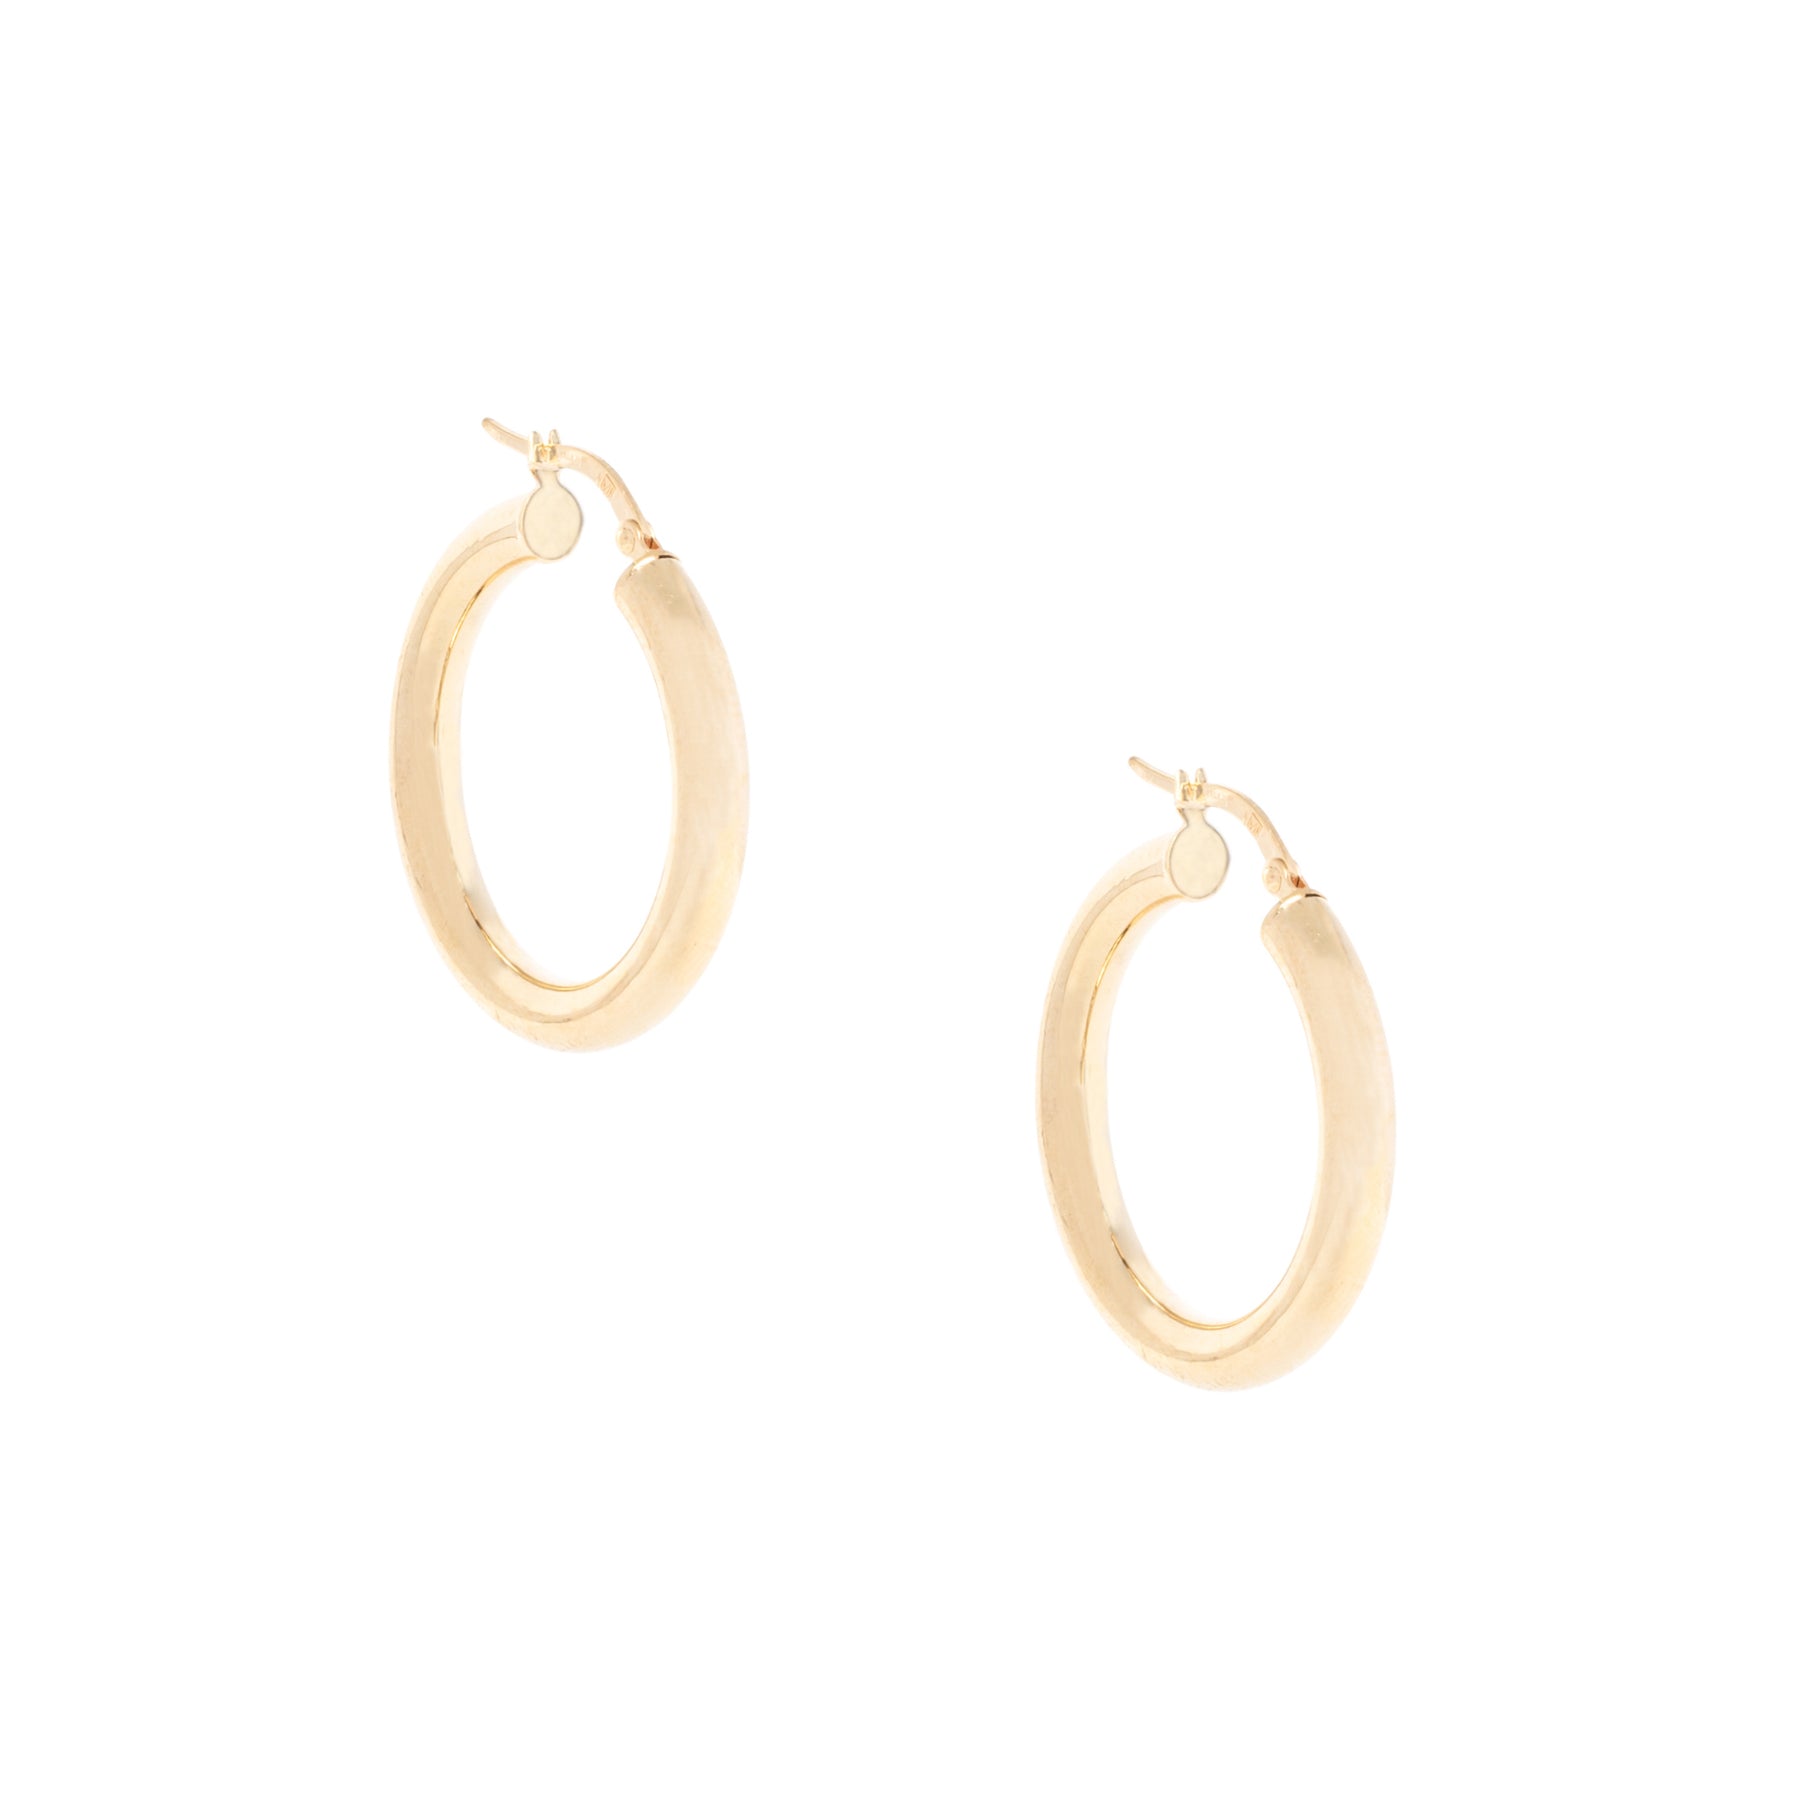 1.25 4MM Thick Gold Hoops - Nina Segal Jewelry